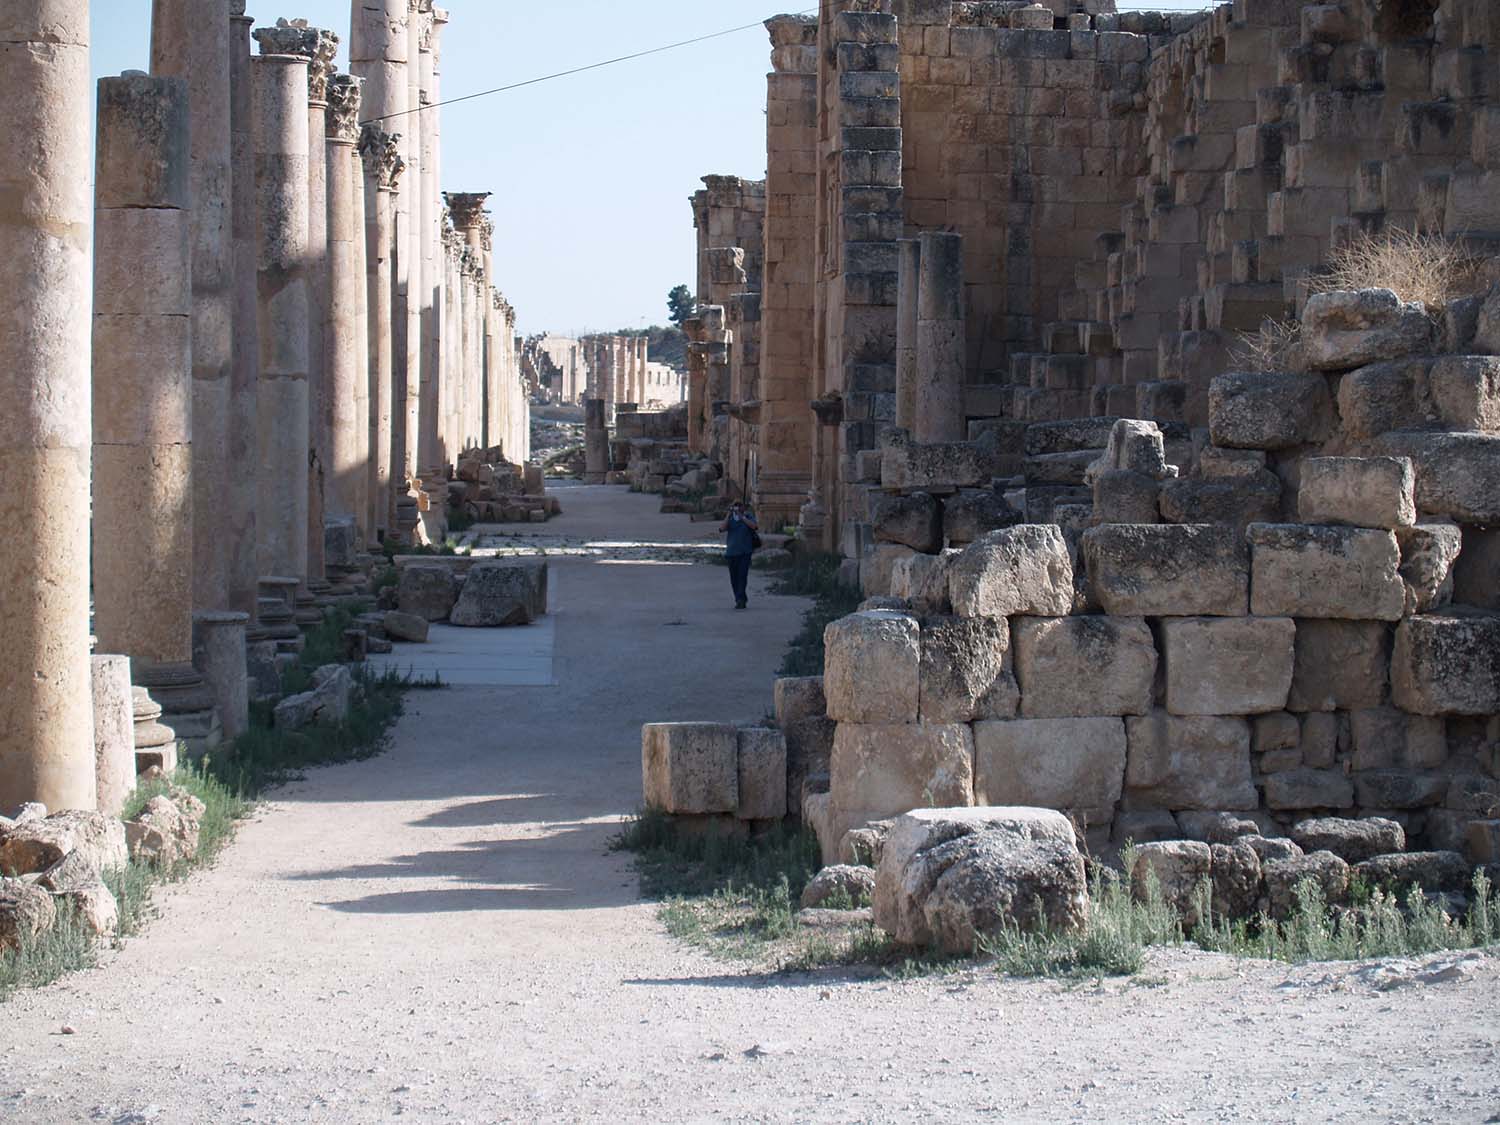 Southward view, colonnade of Cardo Maximus on left, Sanctuary of Artemis on right